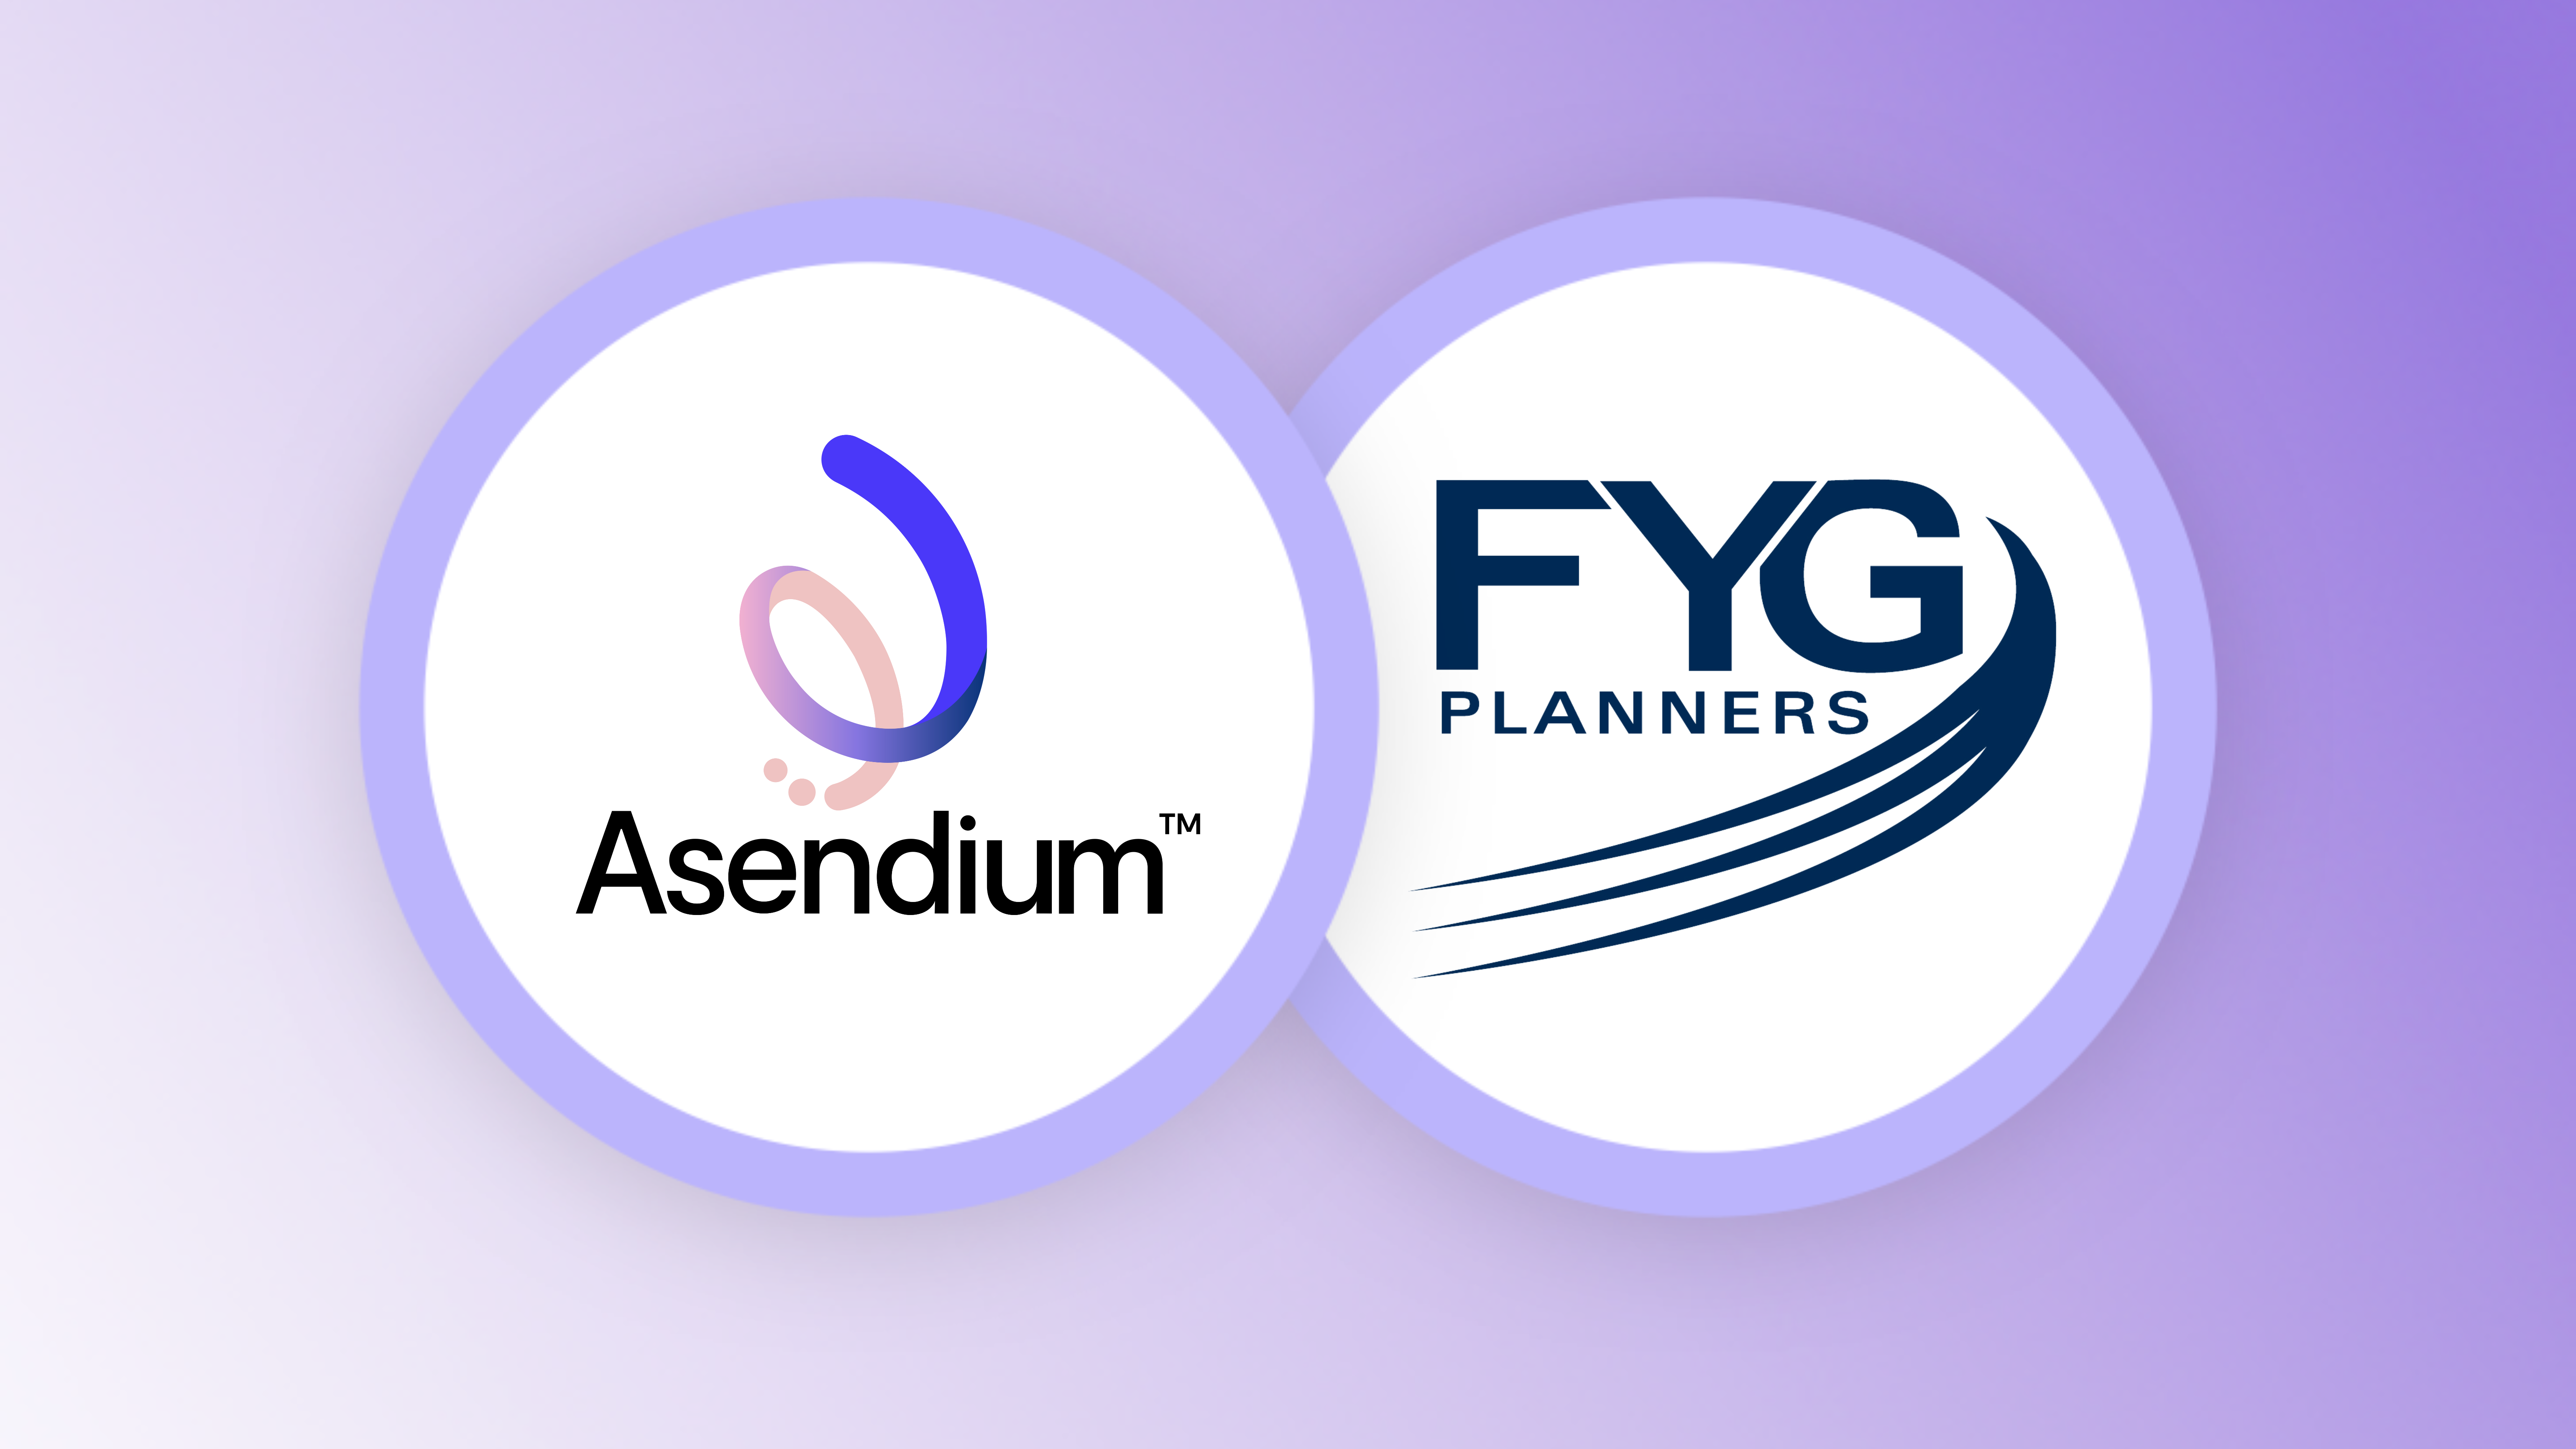 Graphic depicting both Asendium's and FYG Planner's logos side by side.